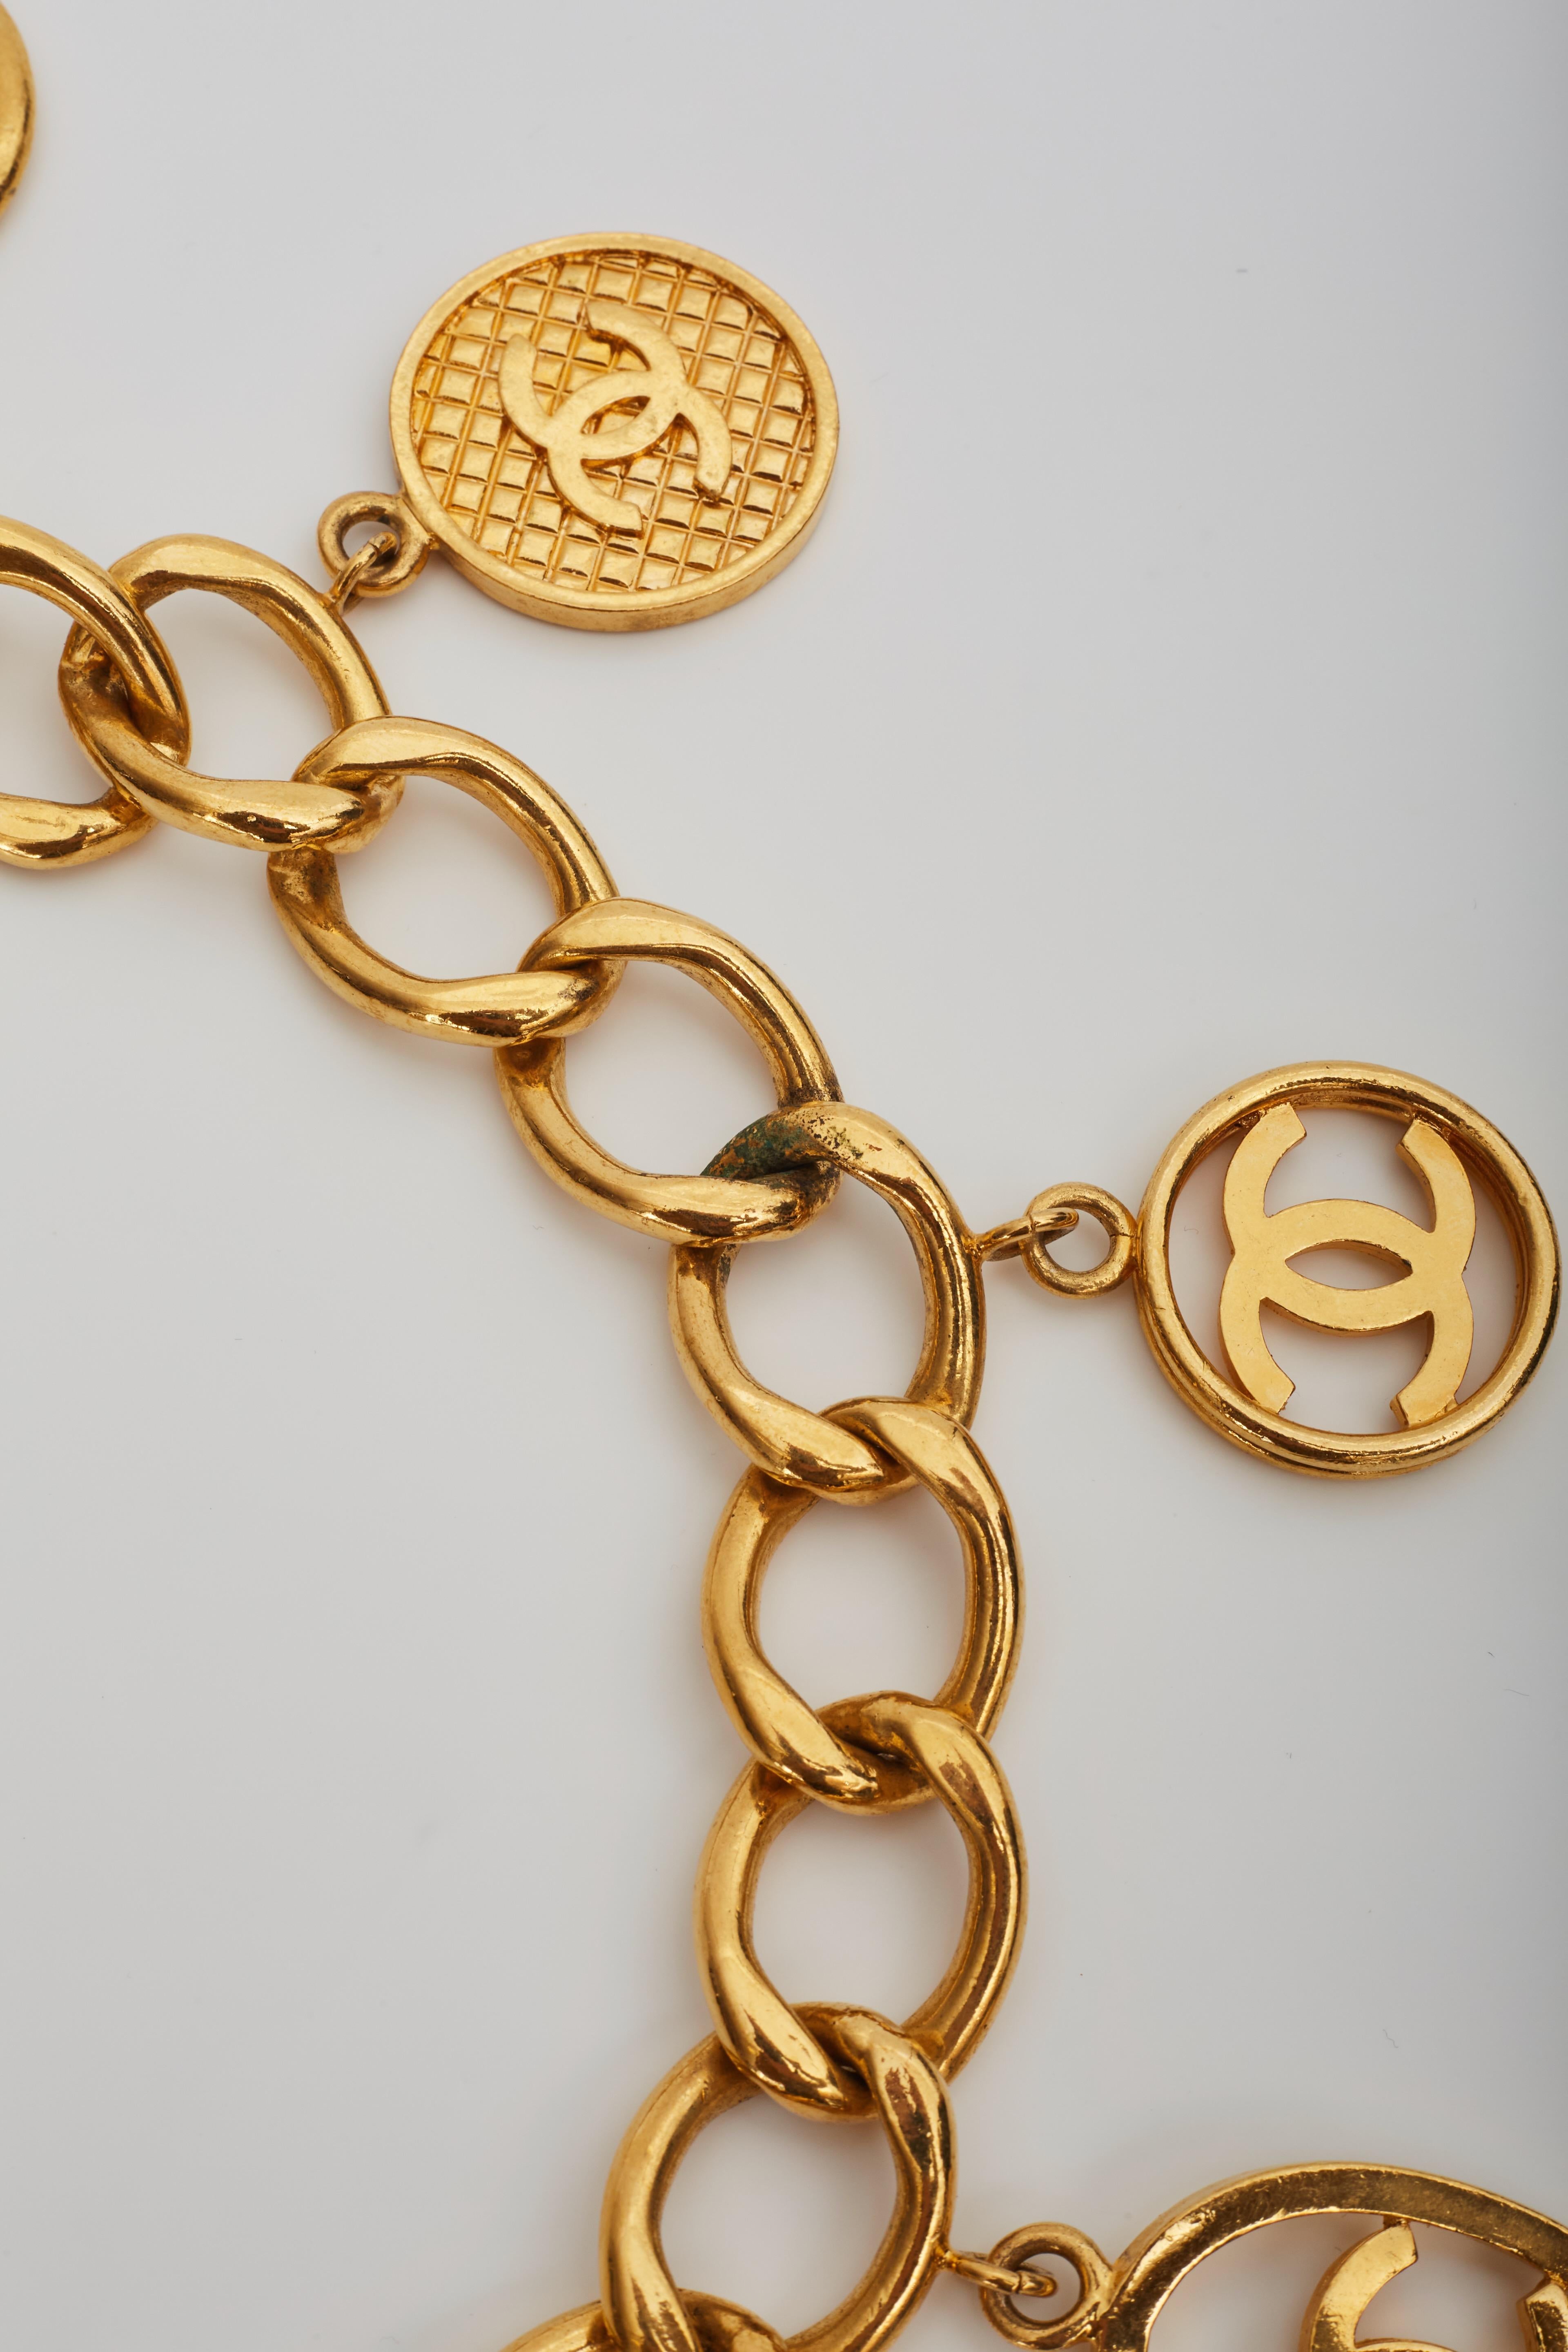 Chanel Logo Coin Medallion Charm Gold Chain Necklace Belt (1993) 26inch 10